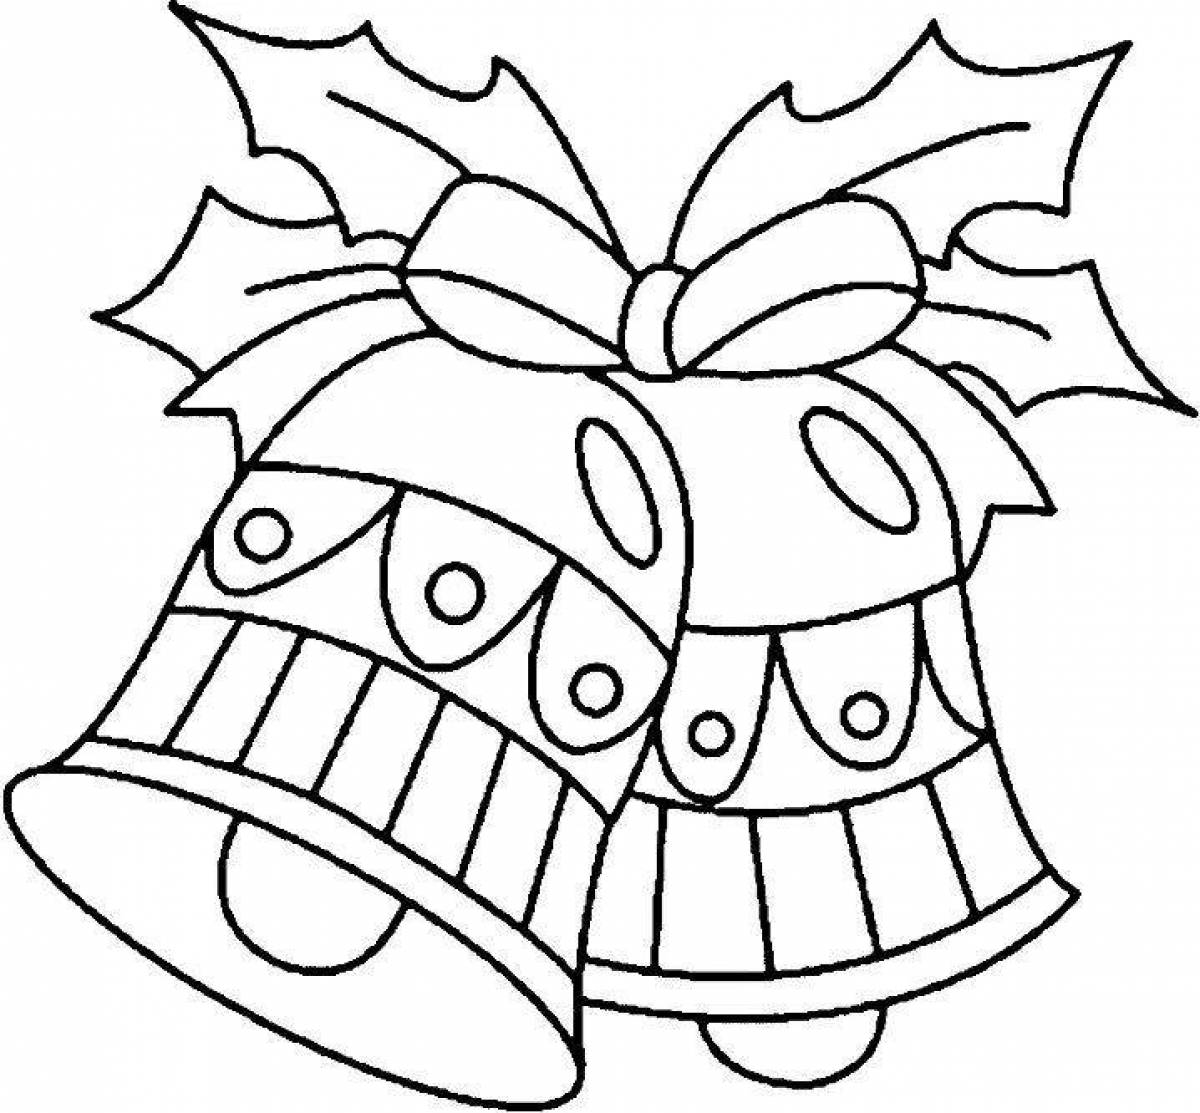 Exalted christmas bell coloring page